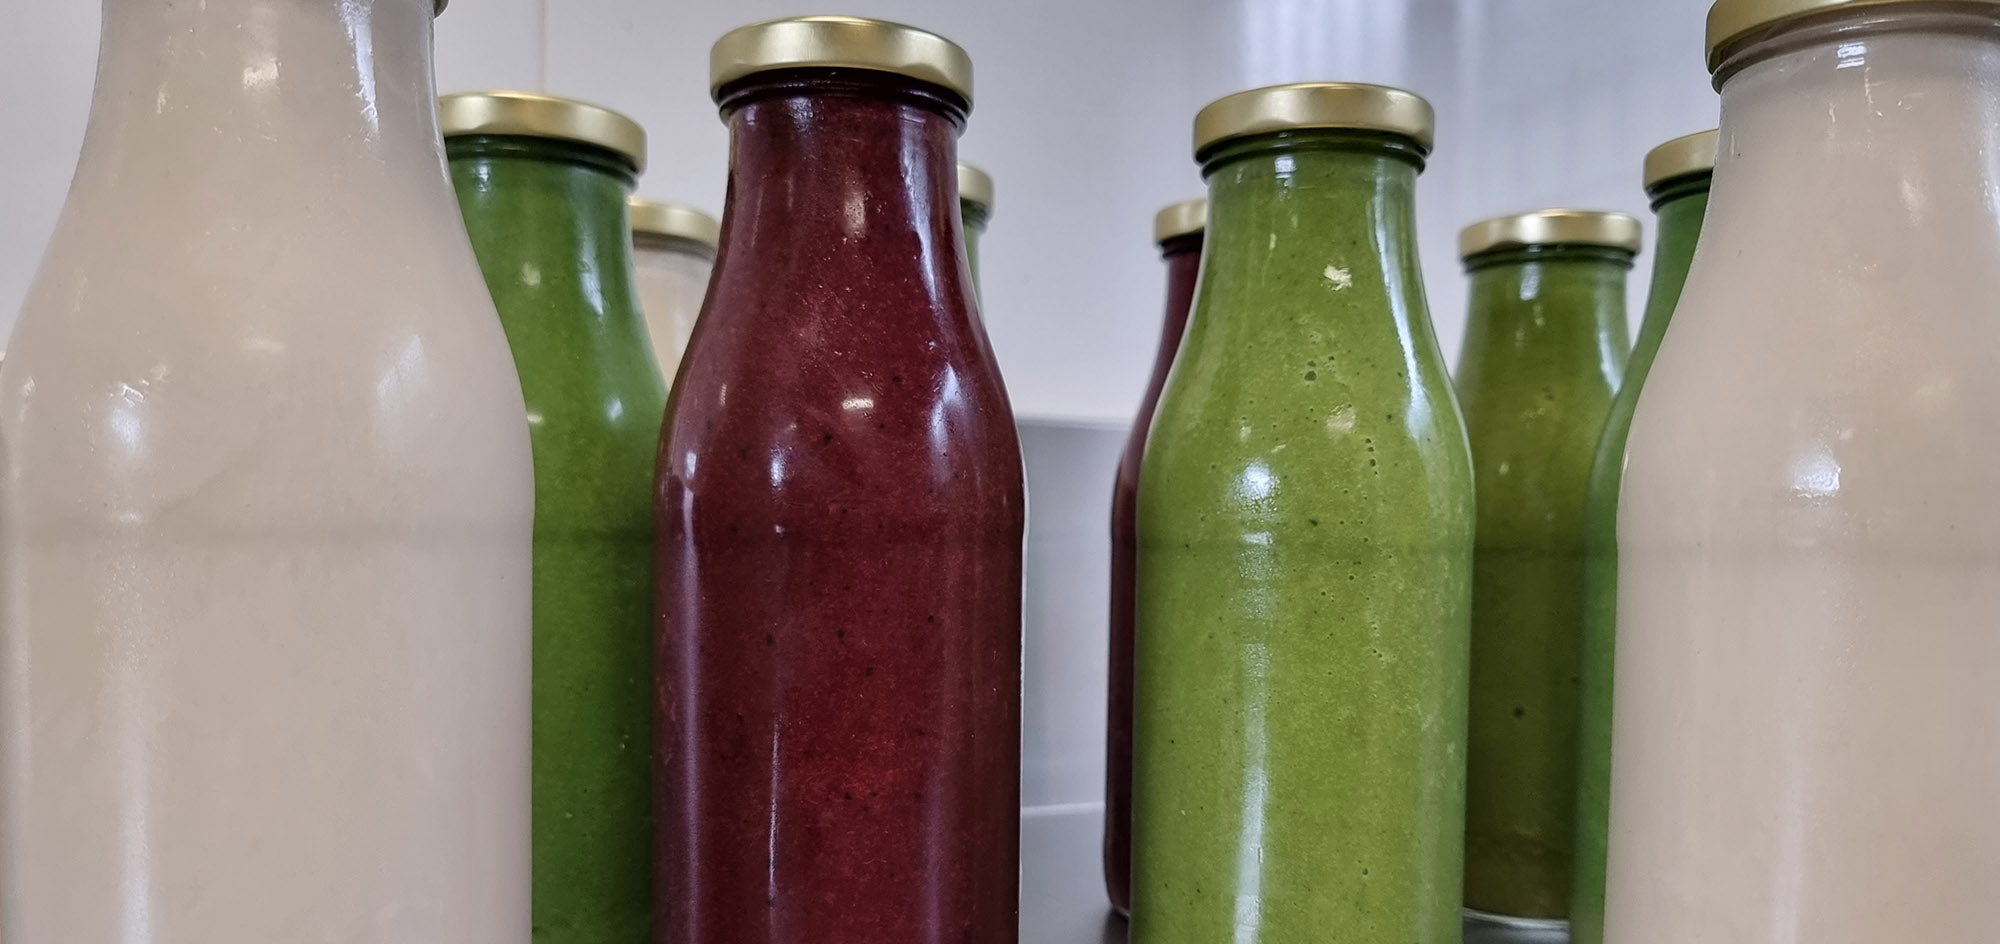 Juices smoothies and mylks for a juice cleanse or detox program from Detox Delivered